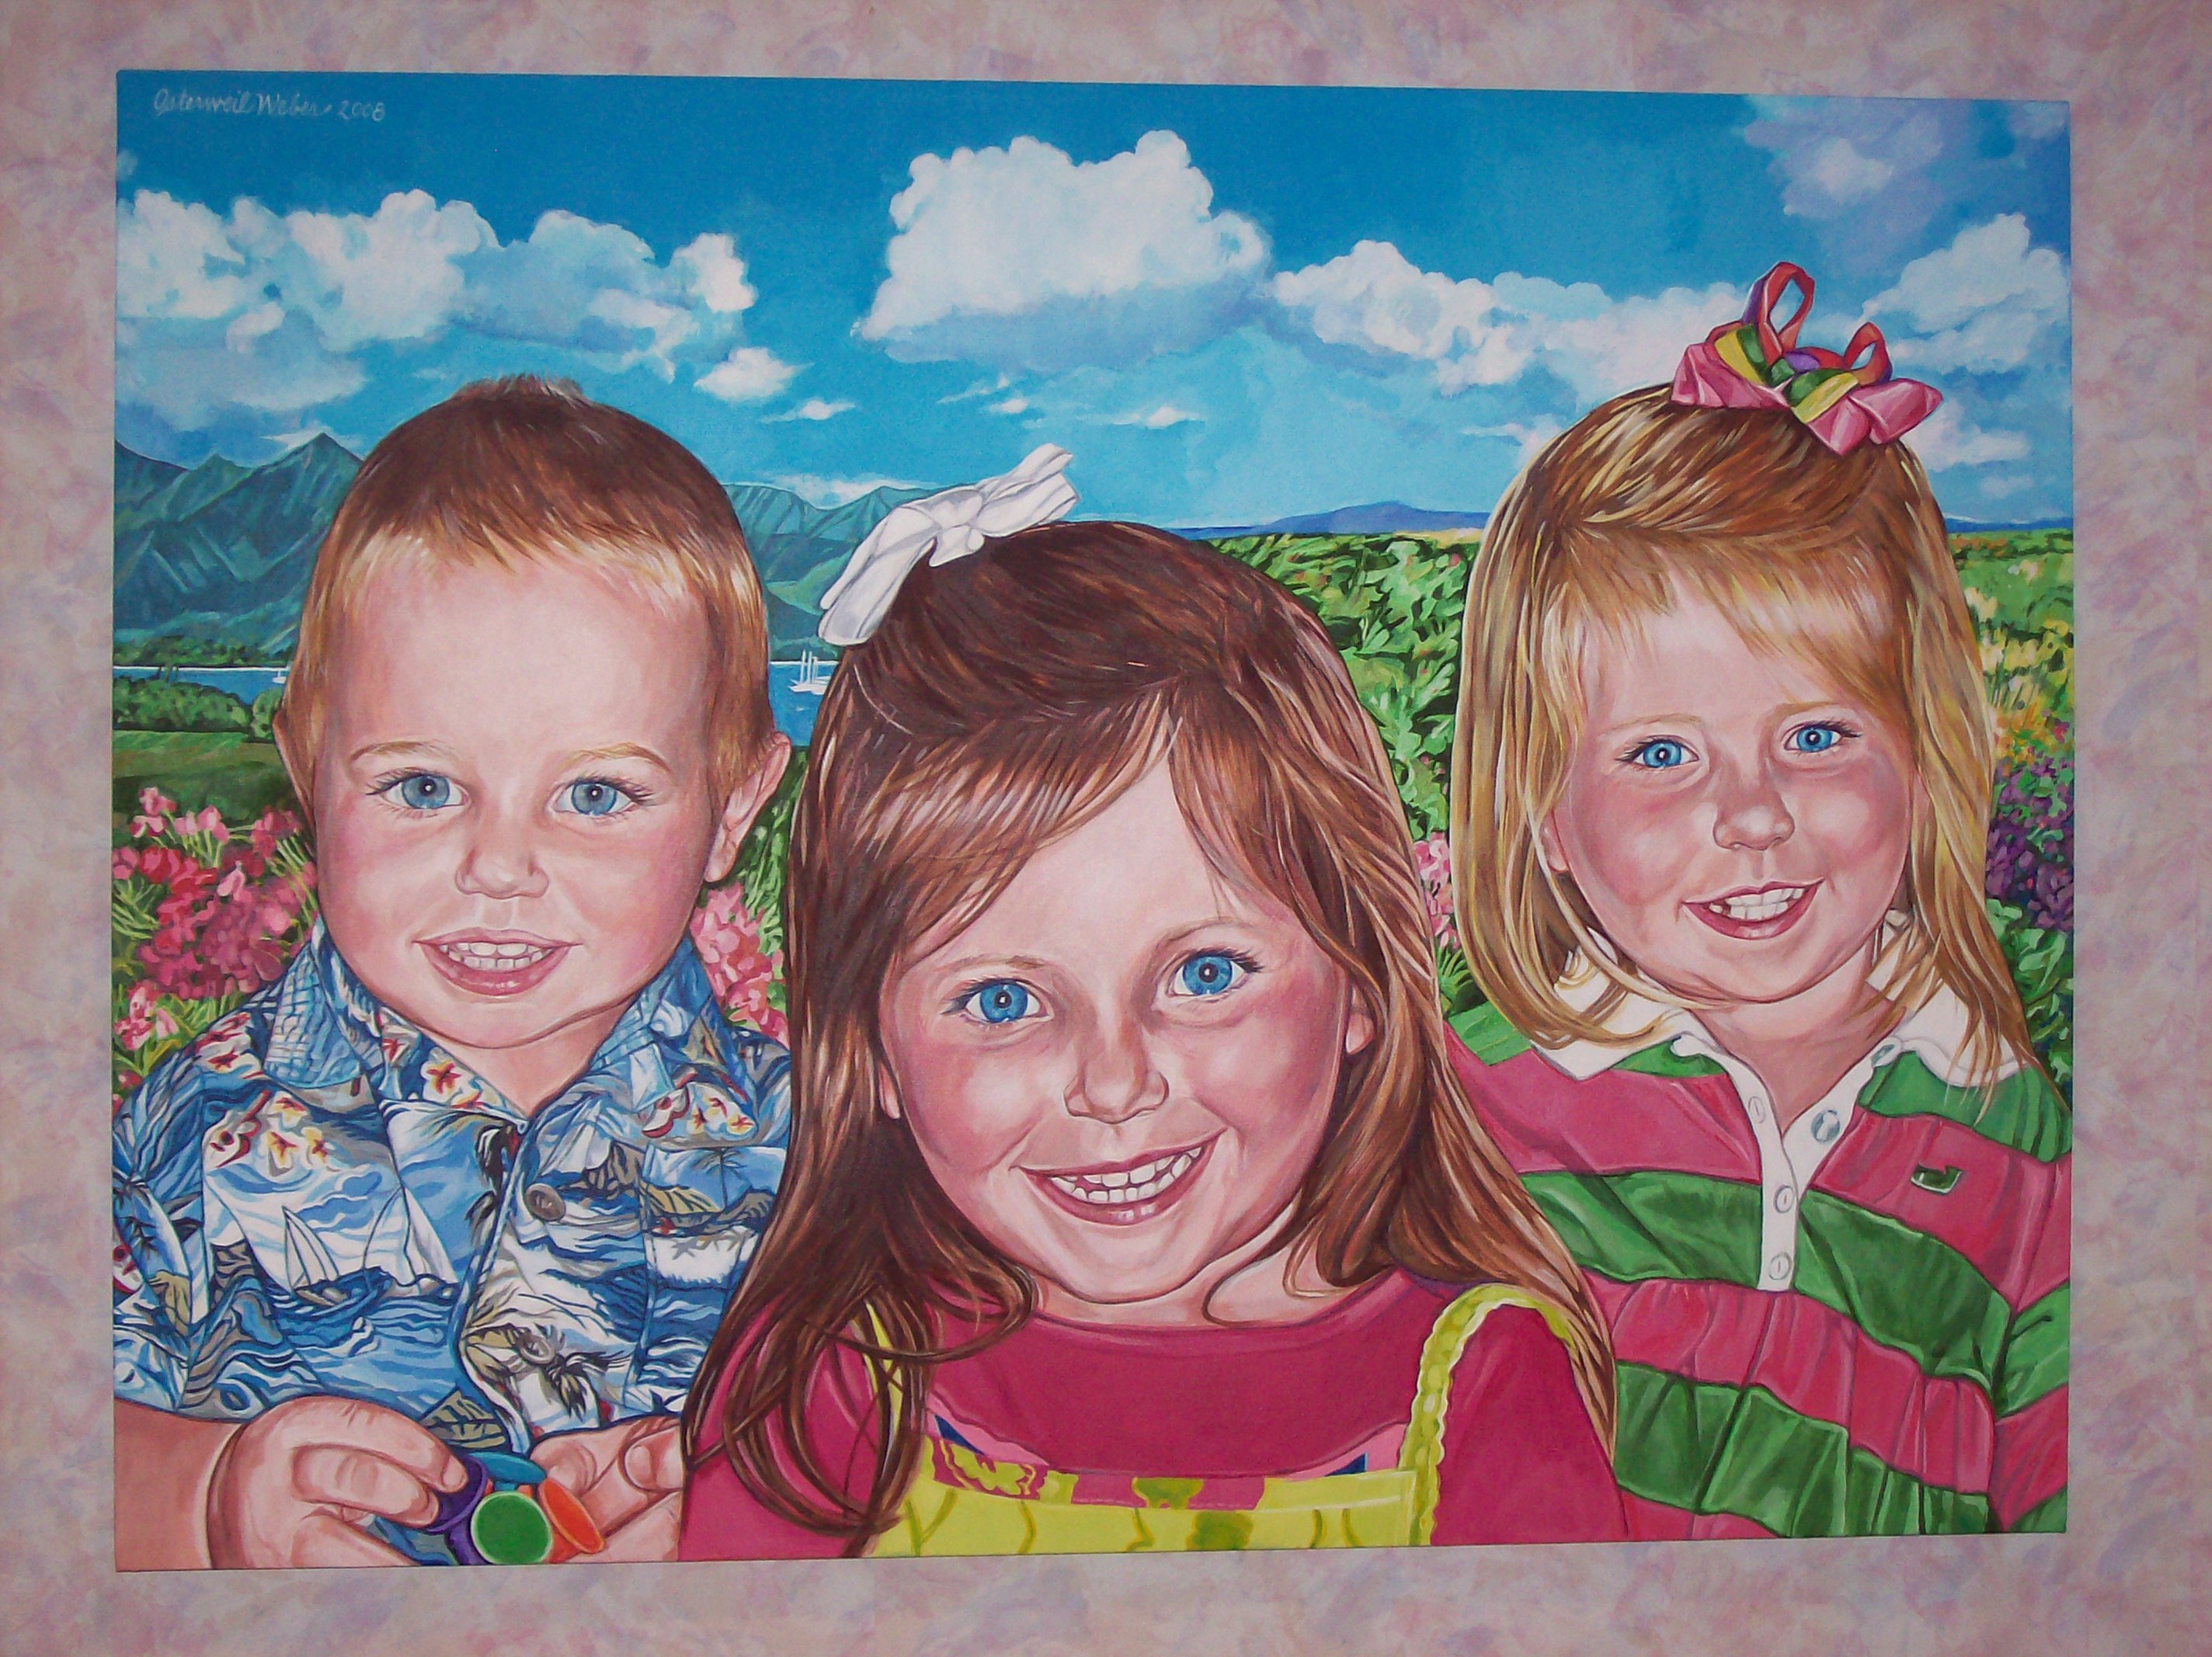 Logan, Quincy and Cassidy, 2008. 30 x 40. Manalapan, New Jersey, for Joanne Sadowsky.